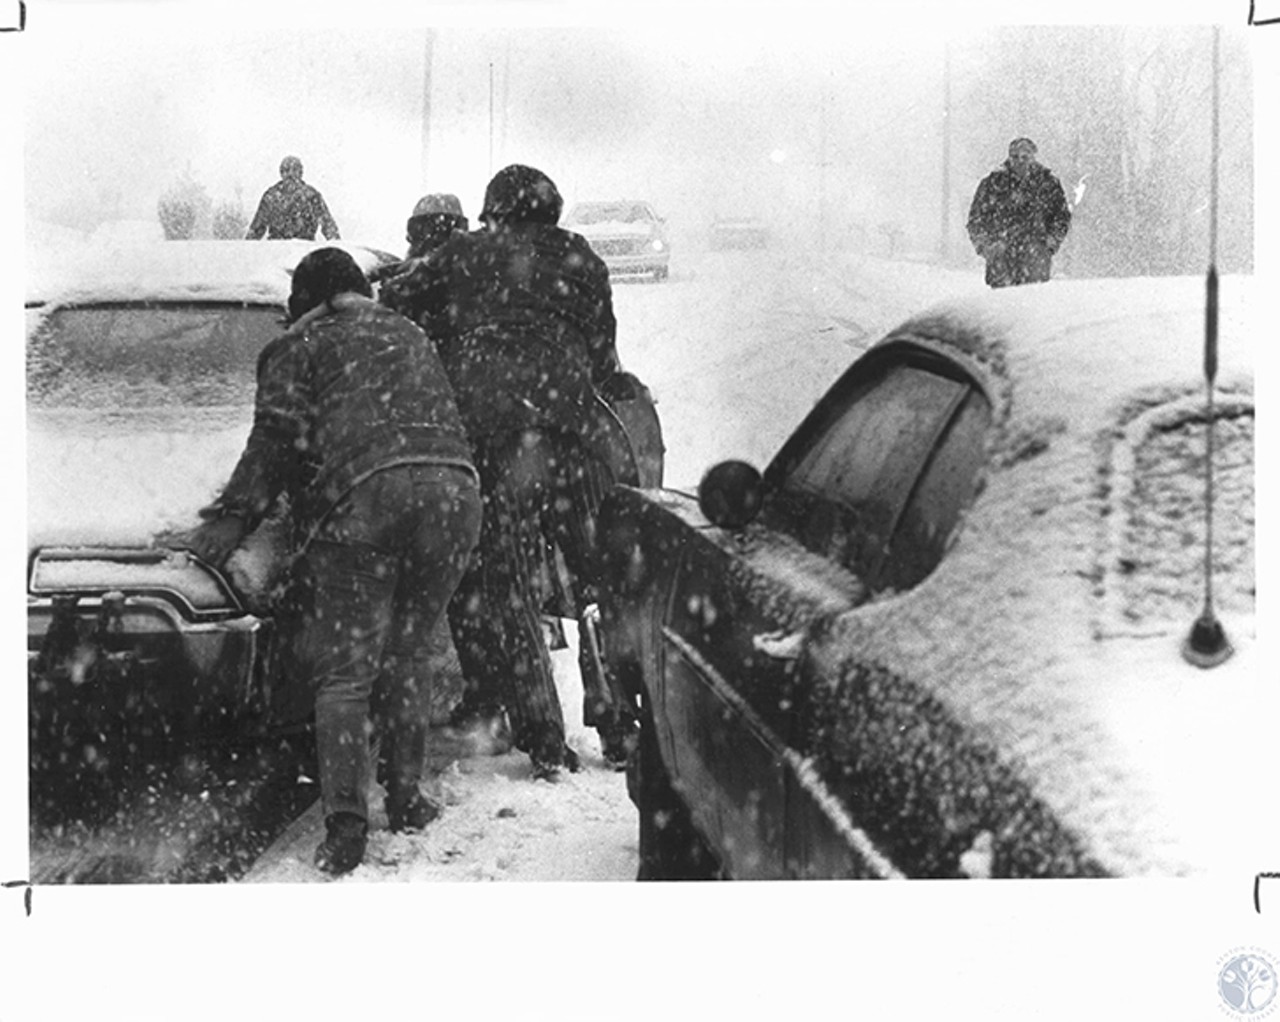 Florence
"People shoving cars uphill during snowstorm at US 42 and Gunpowder Road"